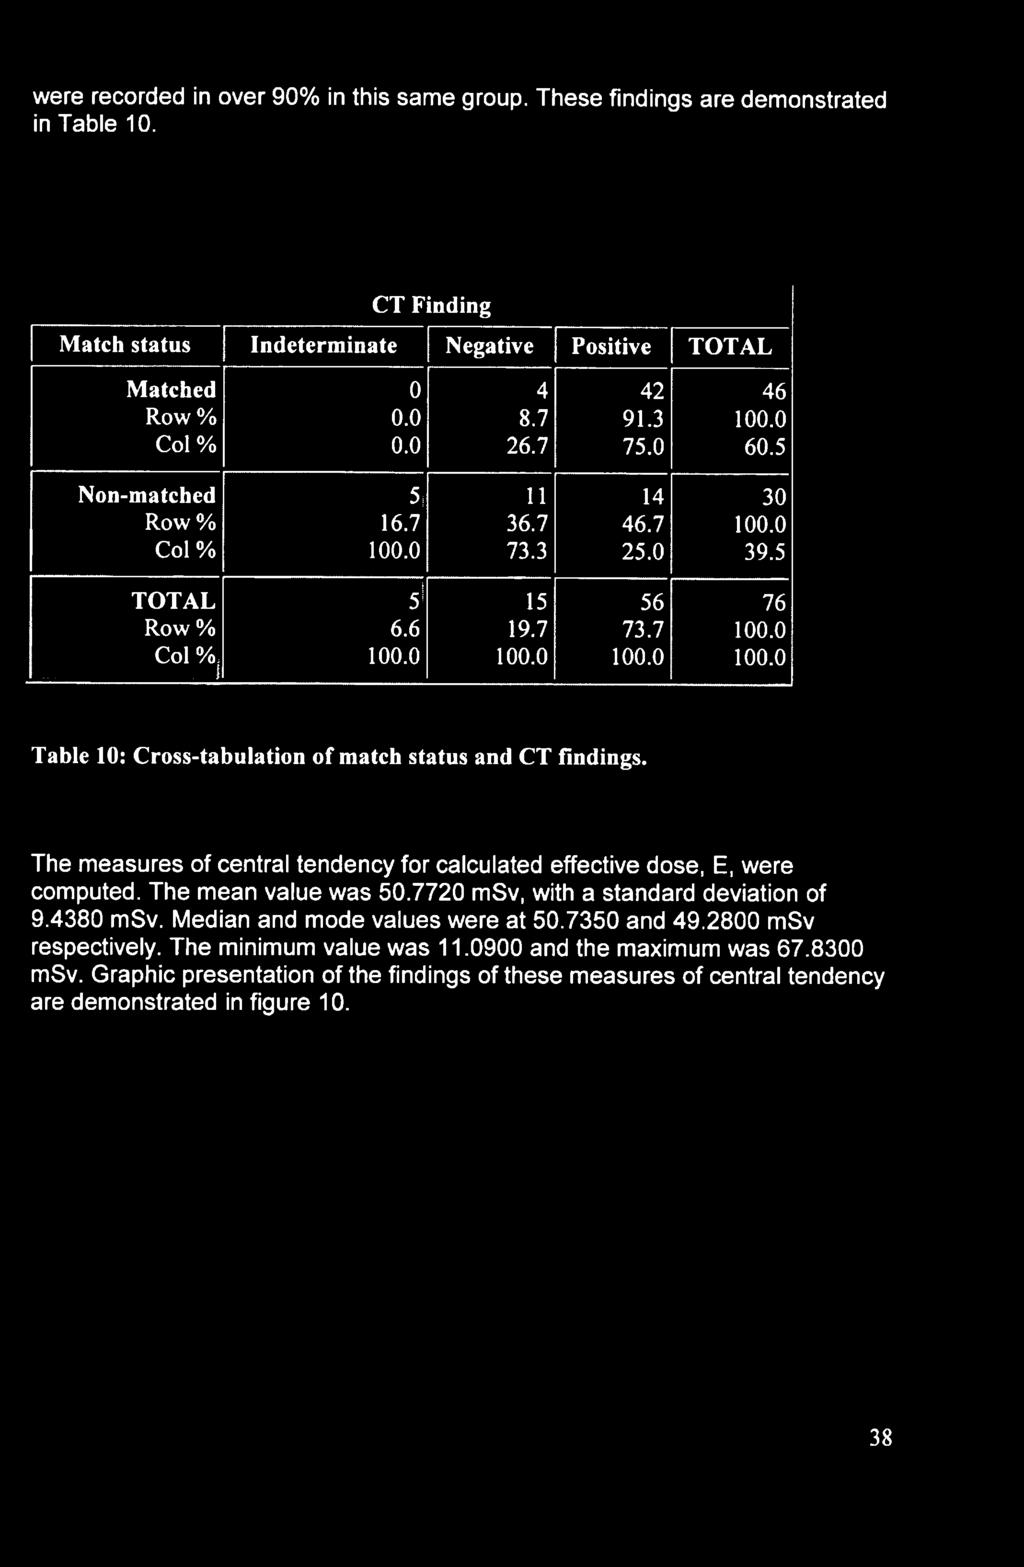 0 100.0 100.0 Table 10: Cross-tabulation of match status and CT findings. The measures of central tendency for calculated effective dose, E, were computed. The mean value was 50.